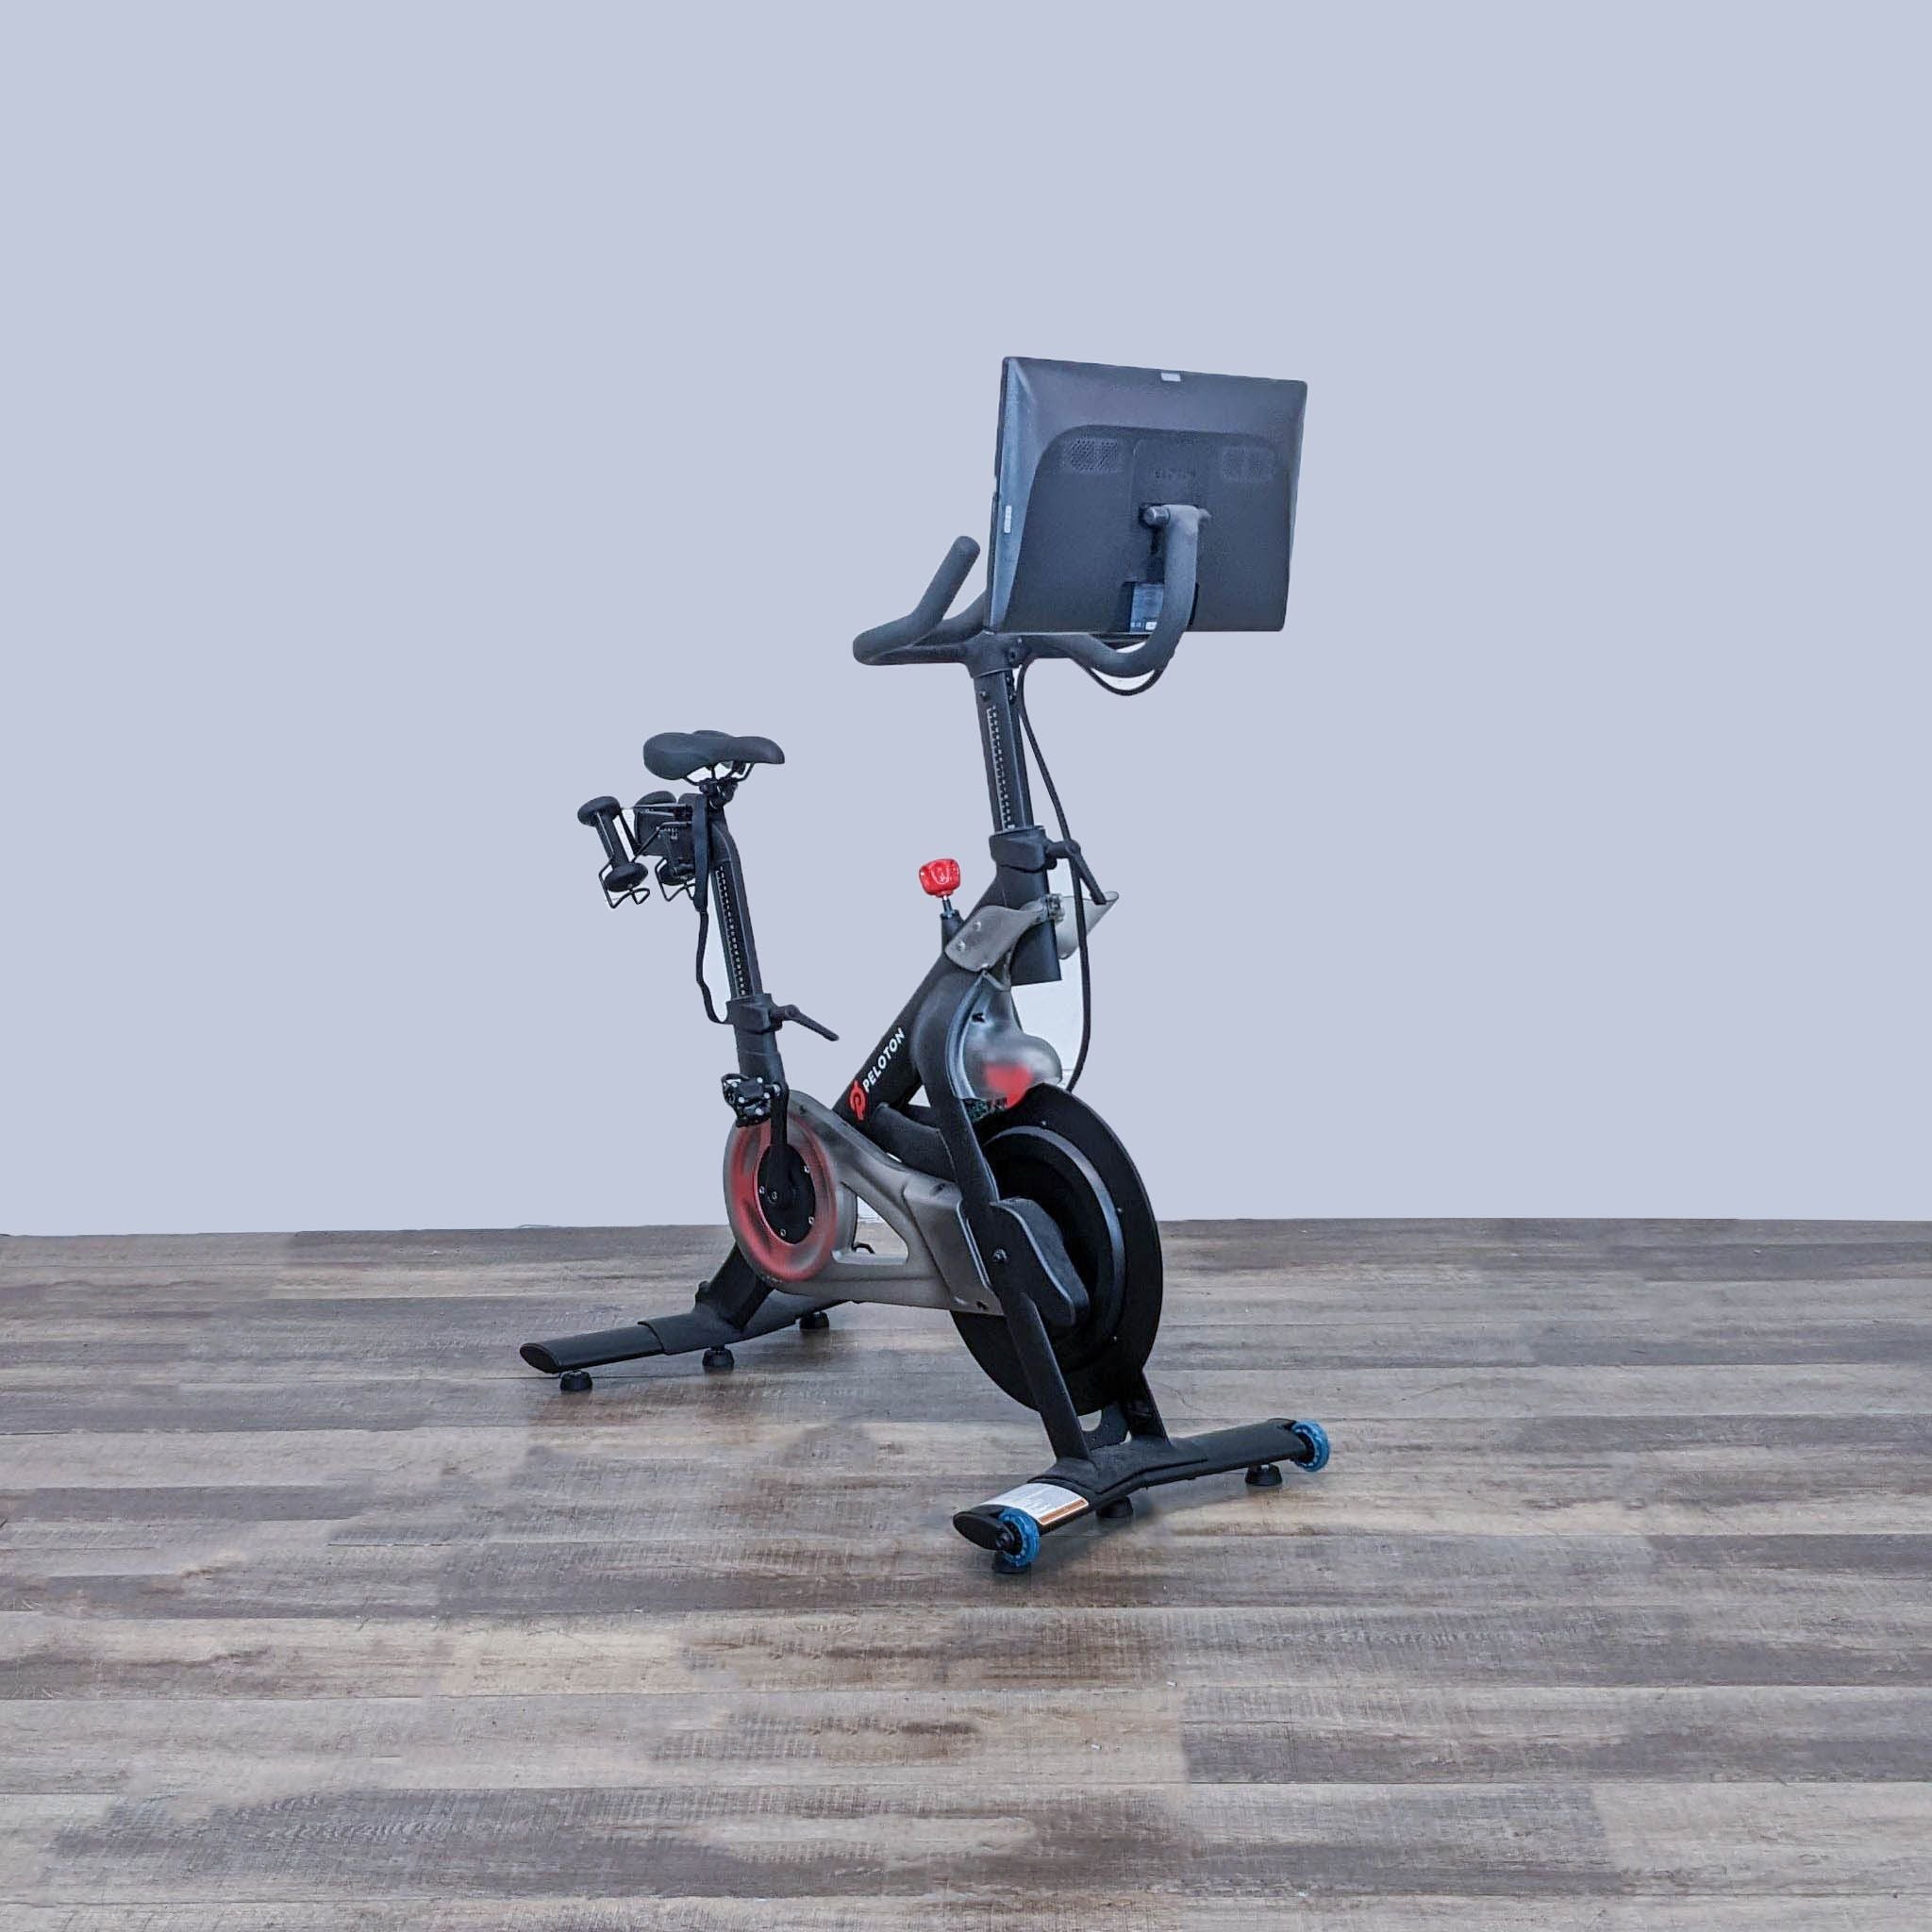 Peloton Indoor Exercise Bike positioned at an angle showing interactive touchscreen and sleek frame. Gym Equipment.